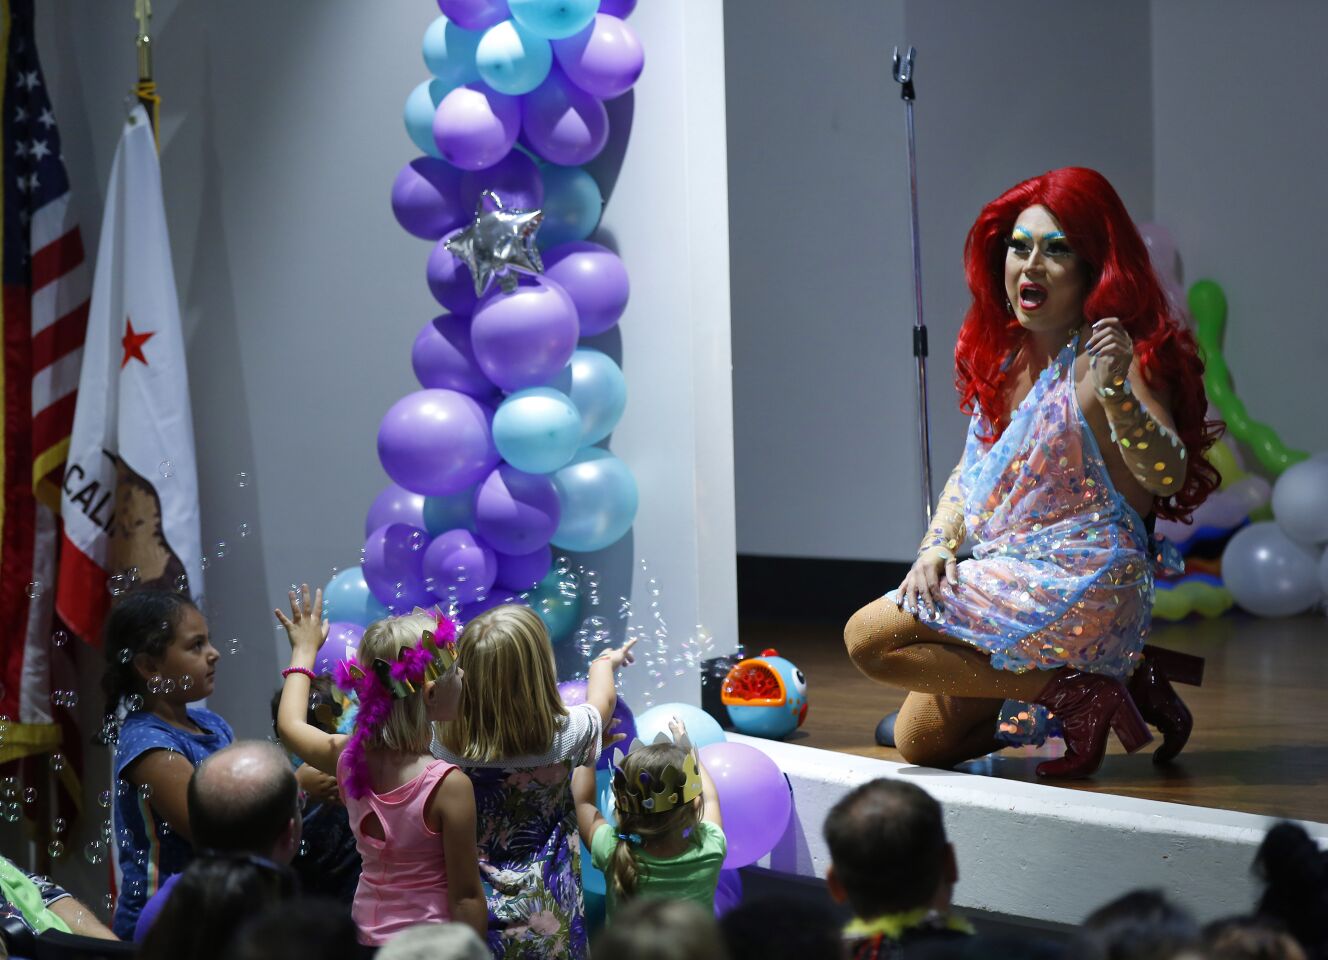 Raquelita, a drag queen, sings a song from the Little Mermaid during Drag Queen Story Time at the Chula Vista Civic Center Library on Sept. 10, 2019.